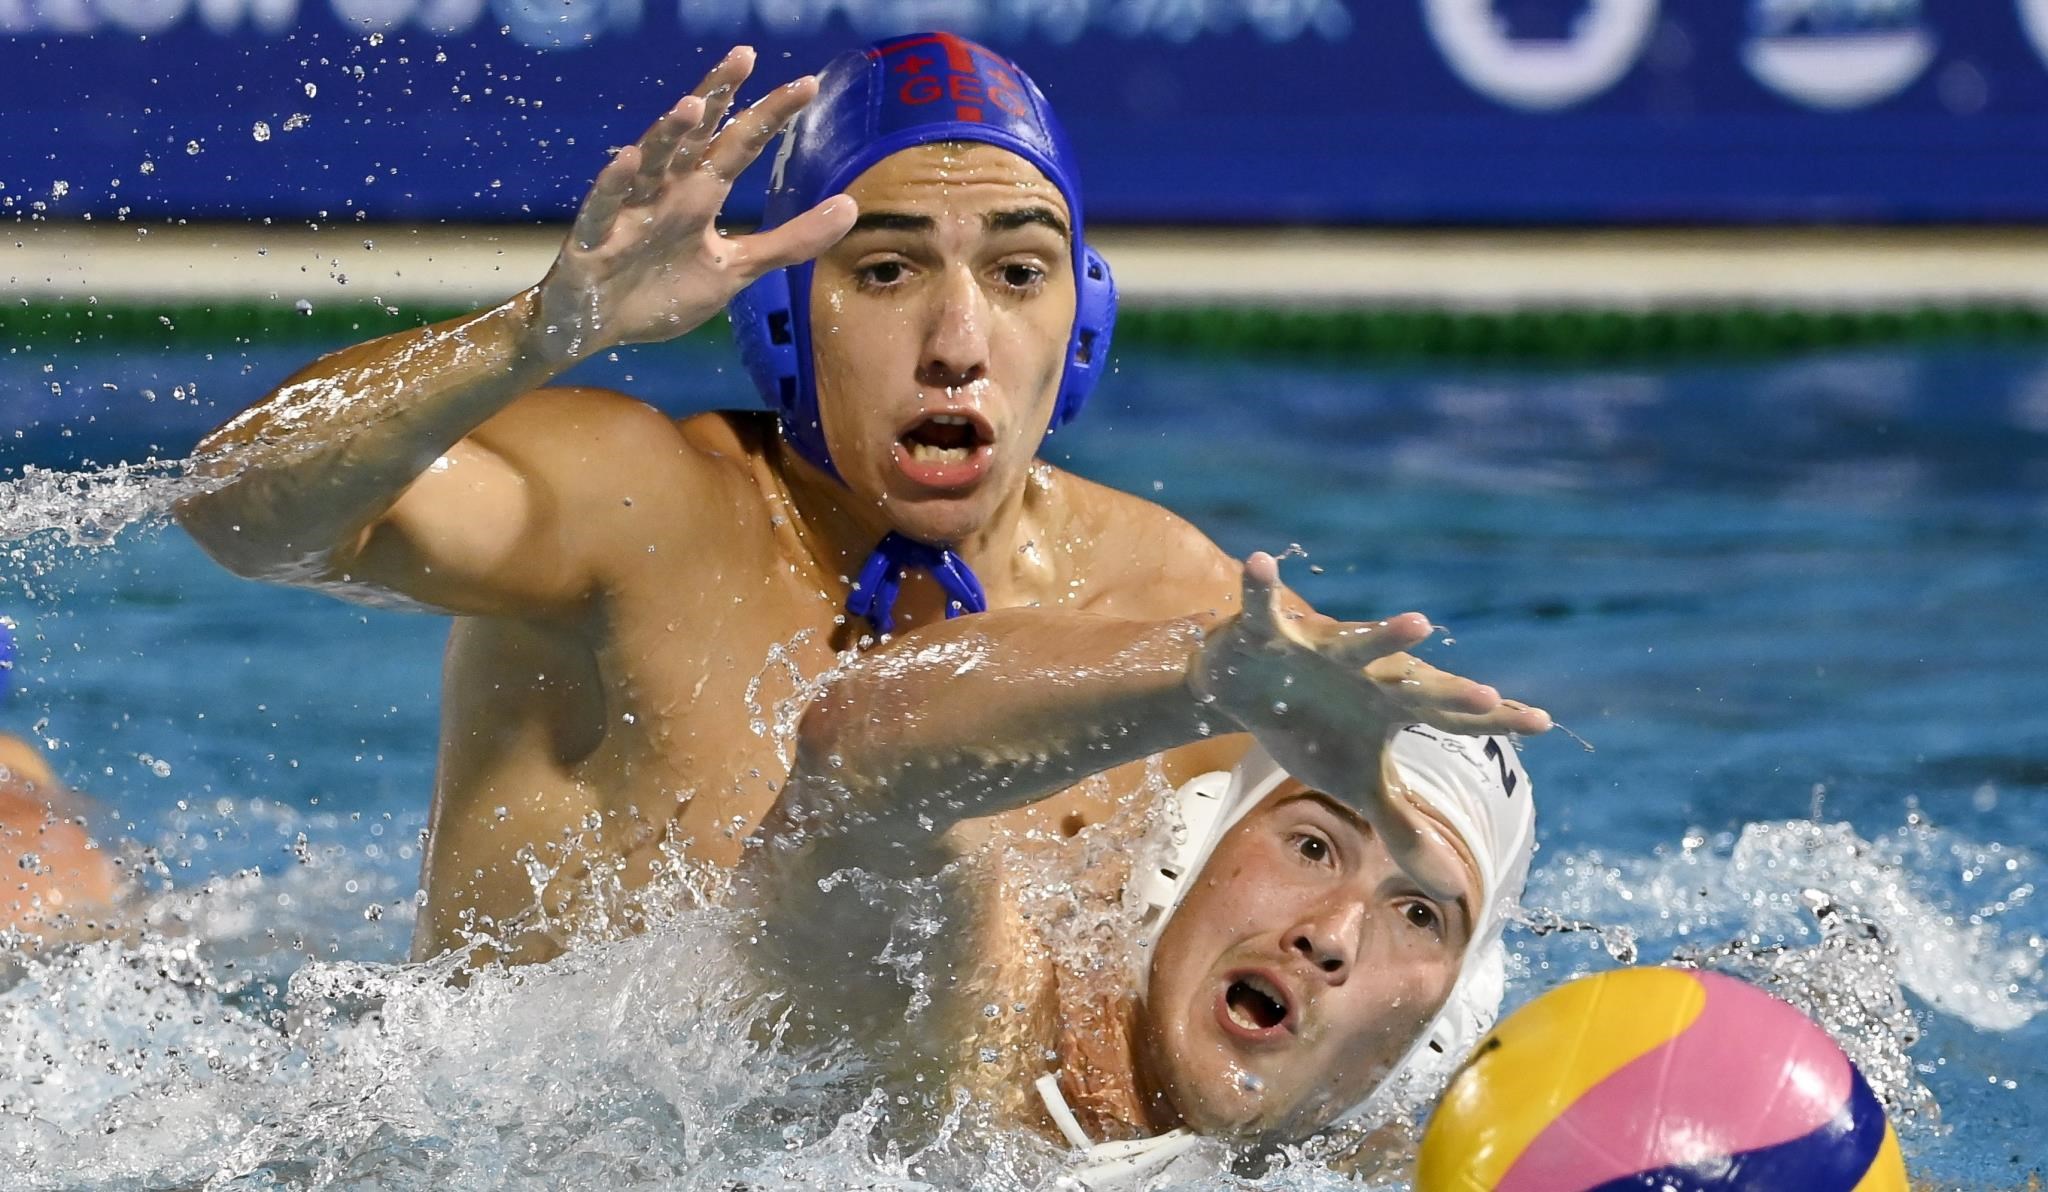 Sports: The US water polo team saved the match against Hungary, but in the end the Hungarian team did not get the bronze medal in the World Cup.